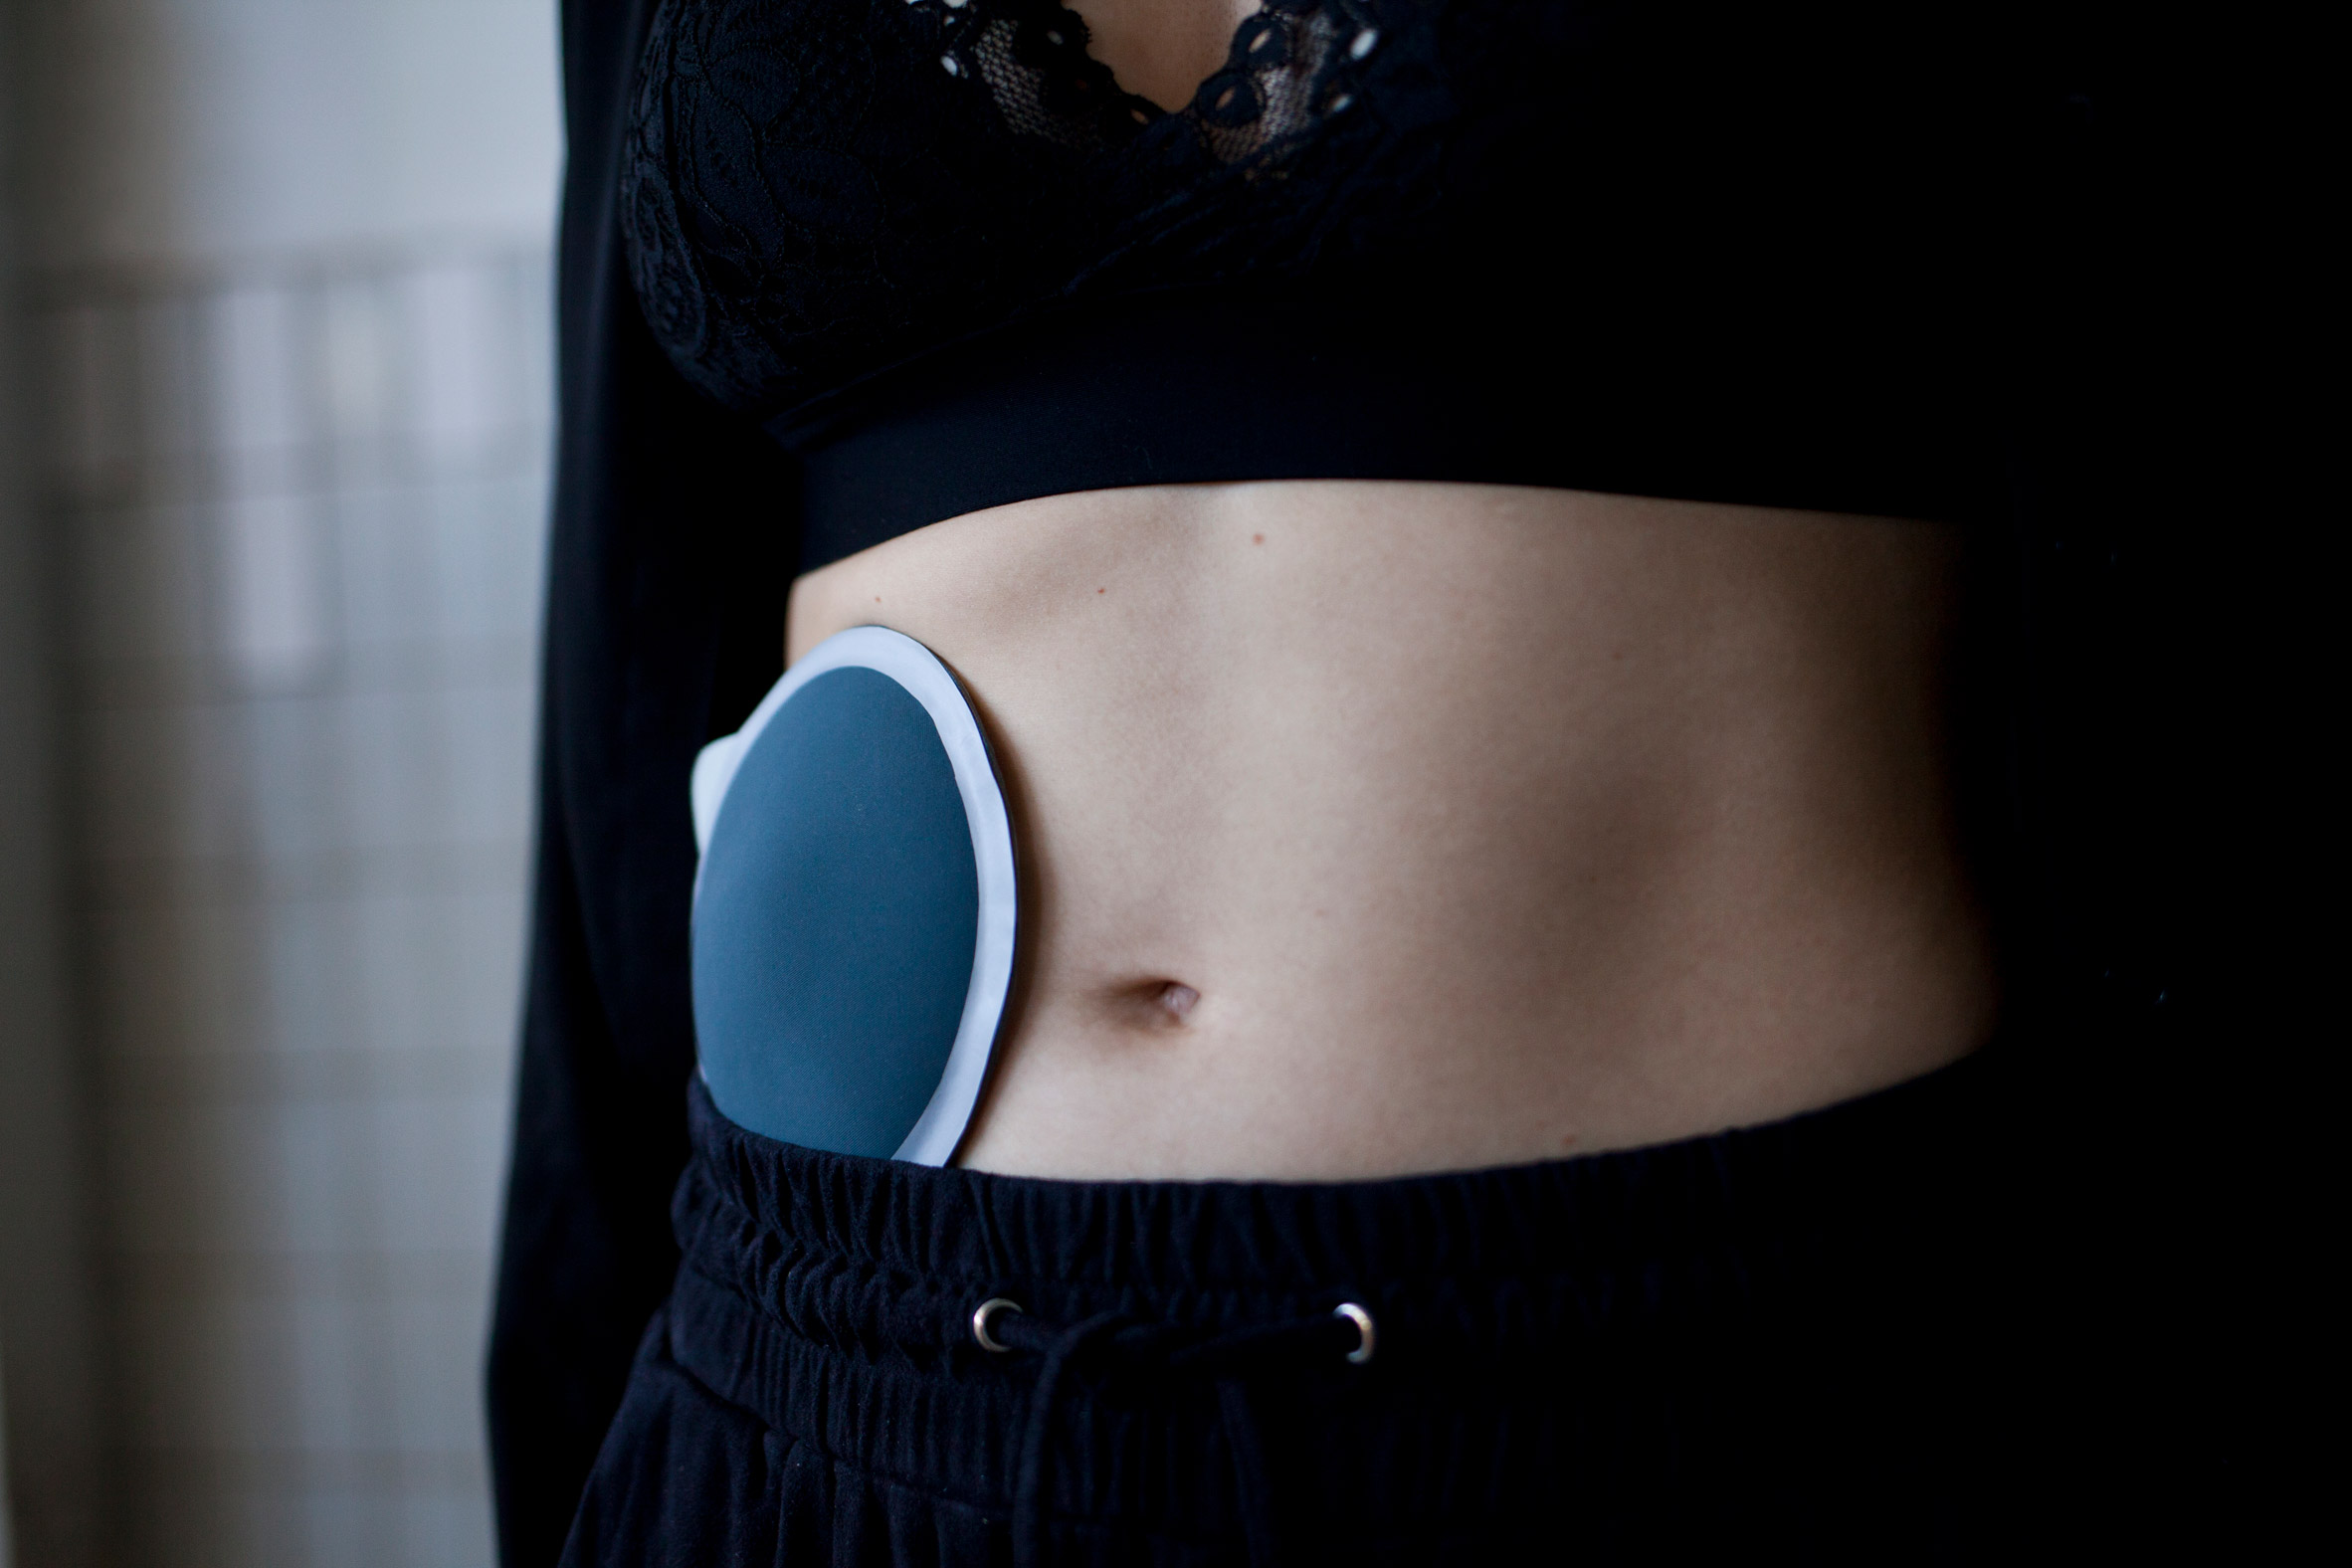 Teddy Schuyers? Guts proposes redesigning the ostomy bag for sex, sport and everyday life